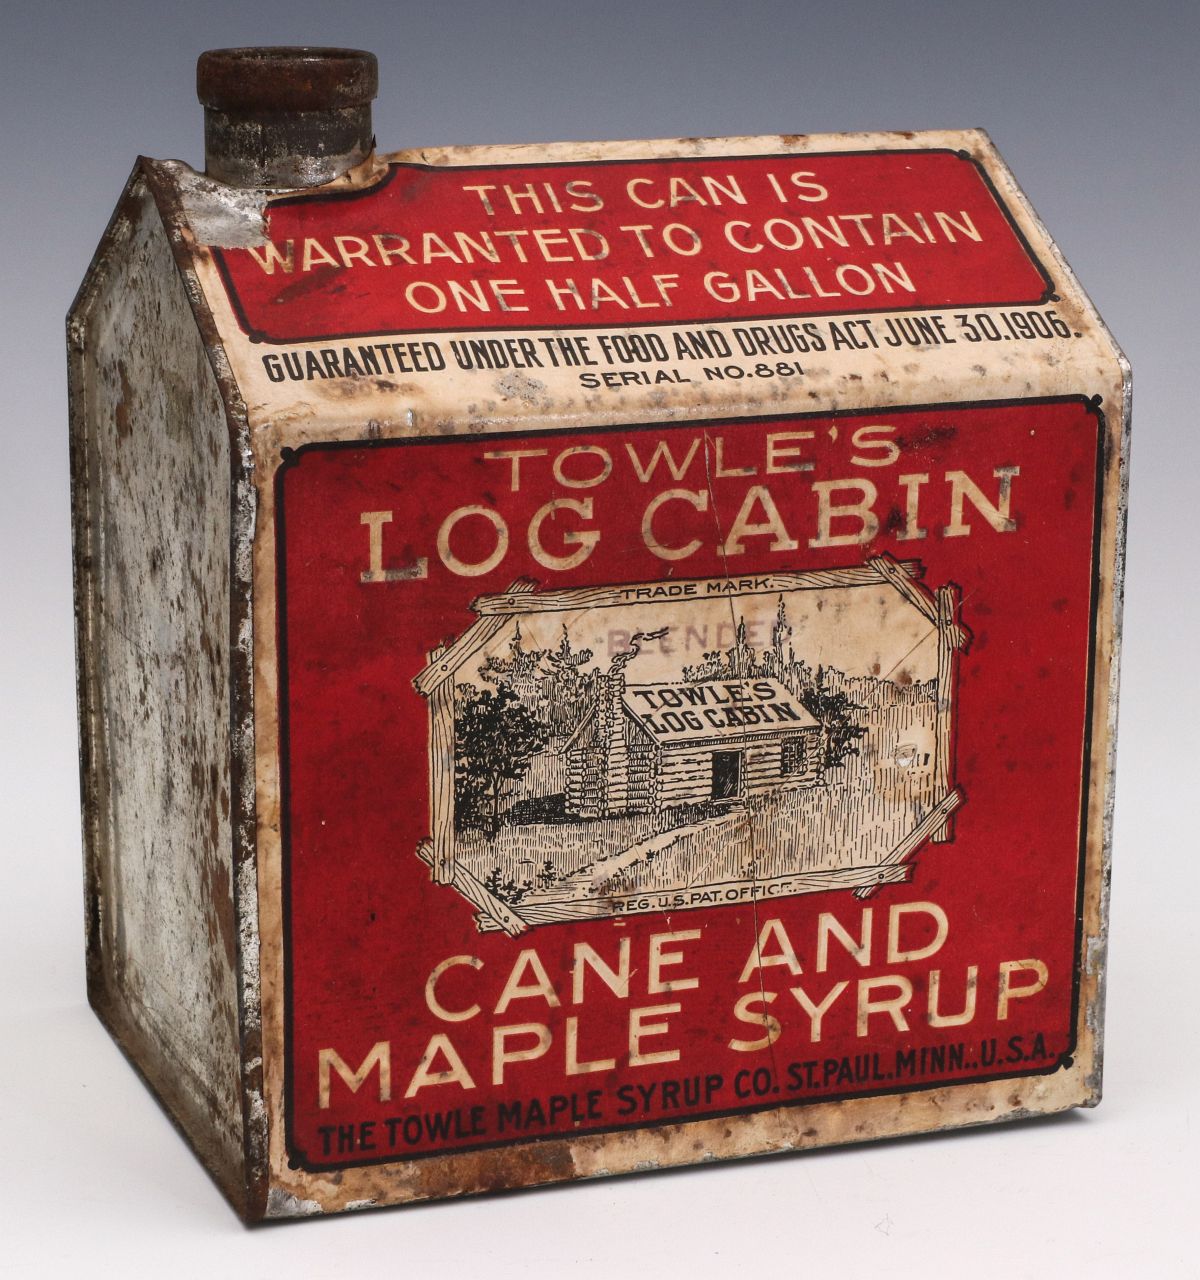 A TOWLE'S LOG CABIN SYRUP 1/2 GALLON CAN C. 1910